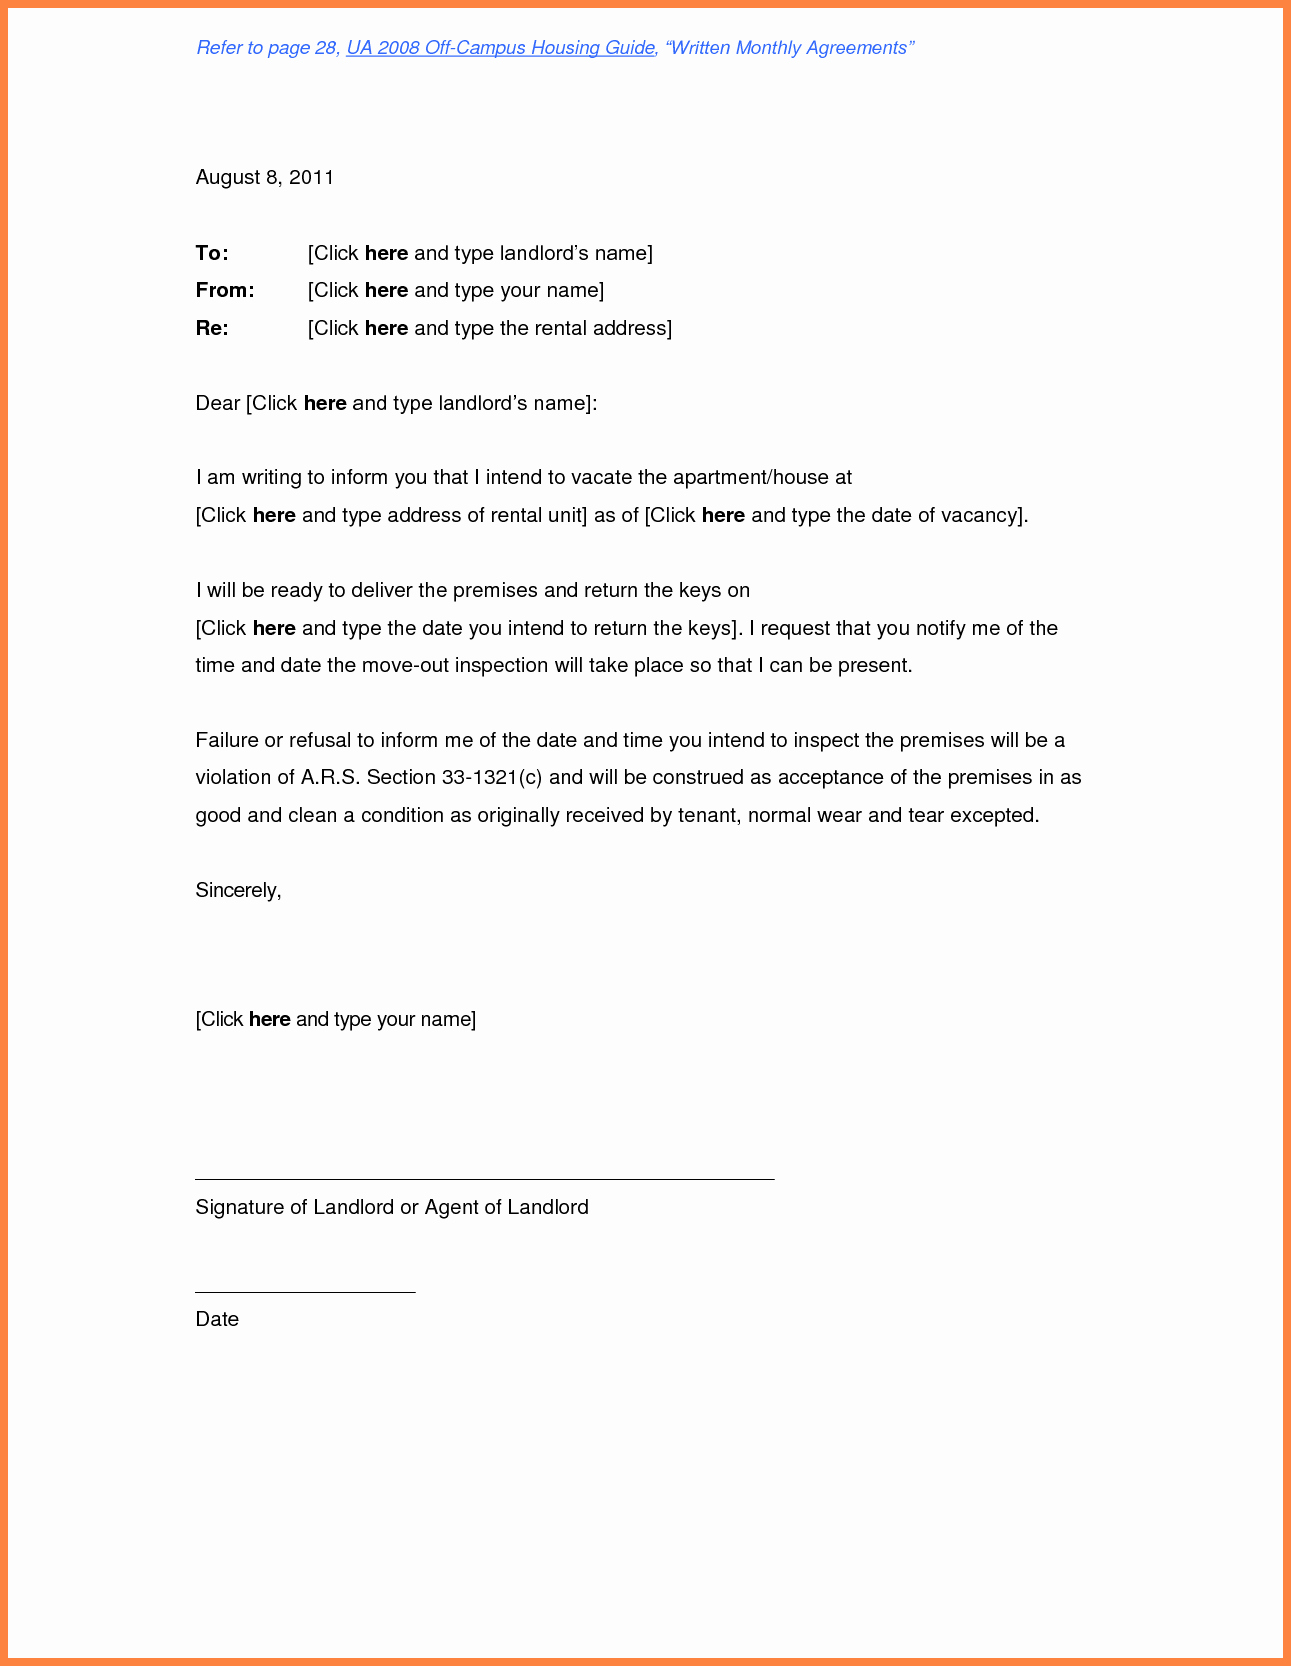 Sample Letter to Landlord Inspirational 8 Termination Of Rental Agreement Letter by Tenant